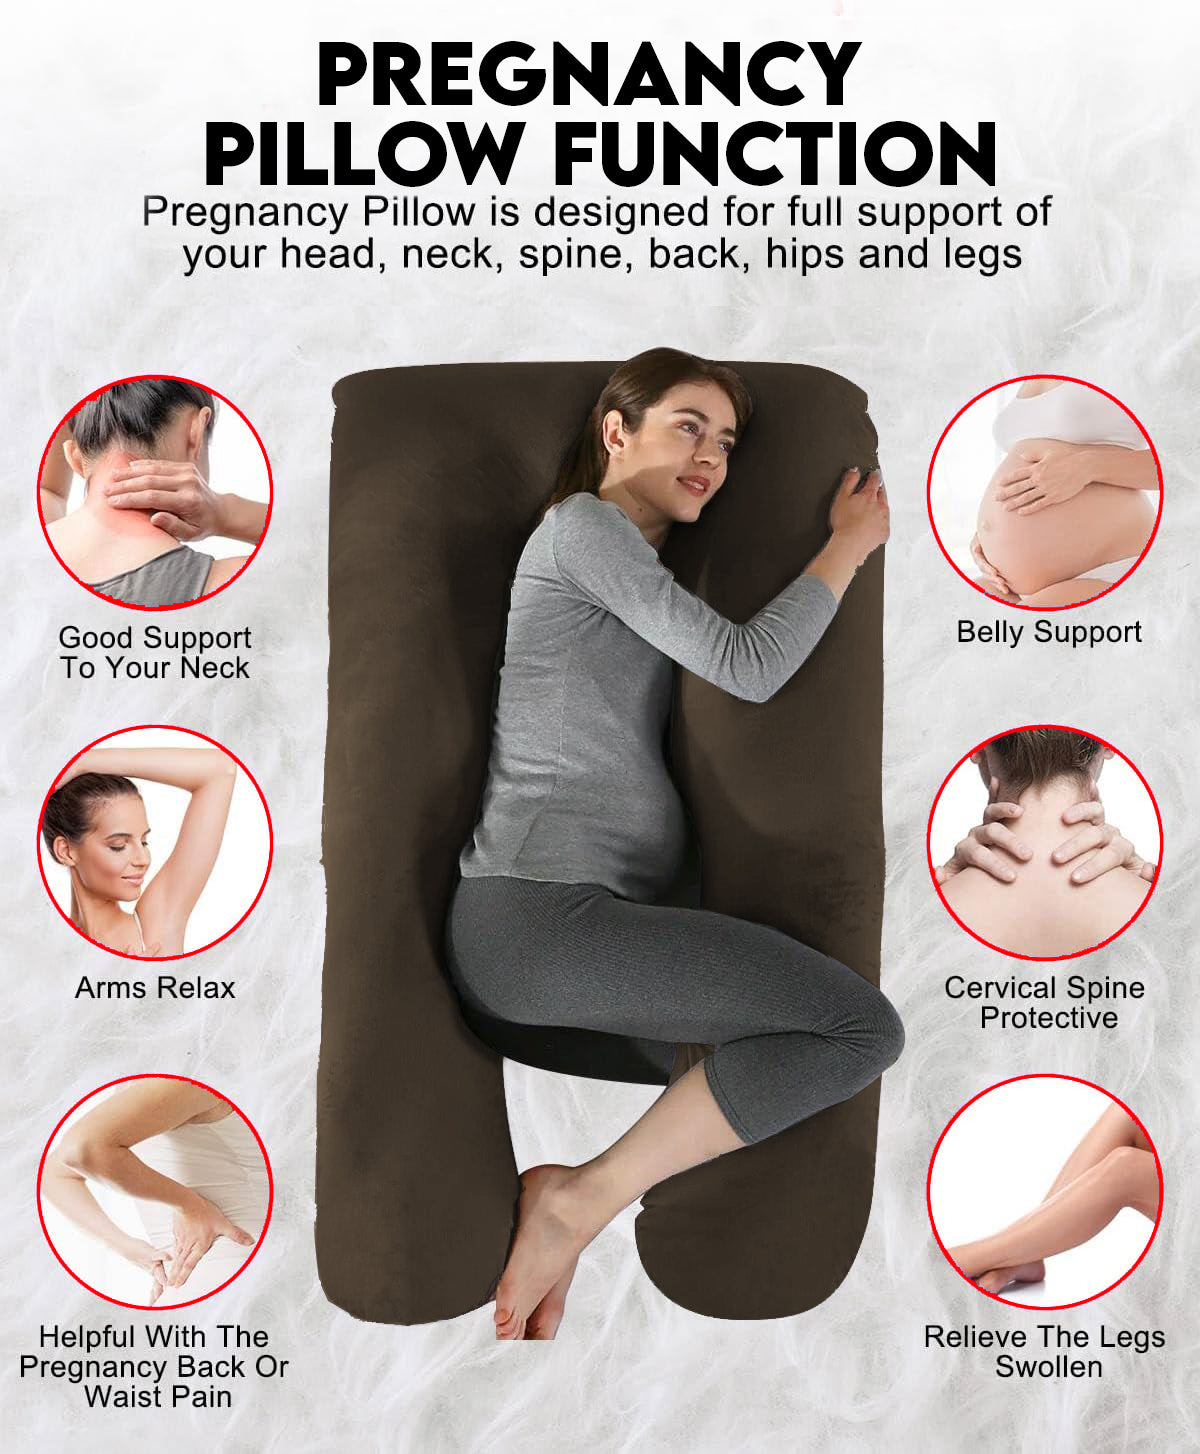 TruComfort U-Shaped Pregnancy Maternity Pillow With Velvet Cover -54 IN X 36 IN - XL Size -Super Premium